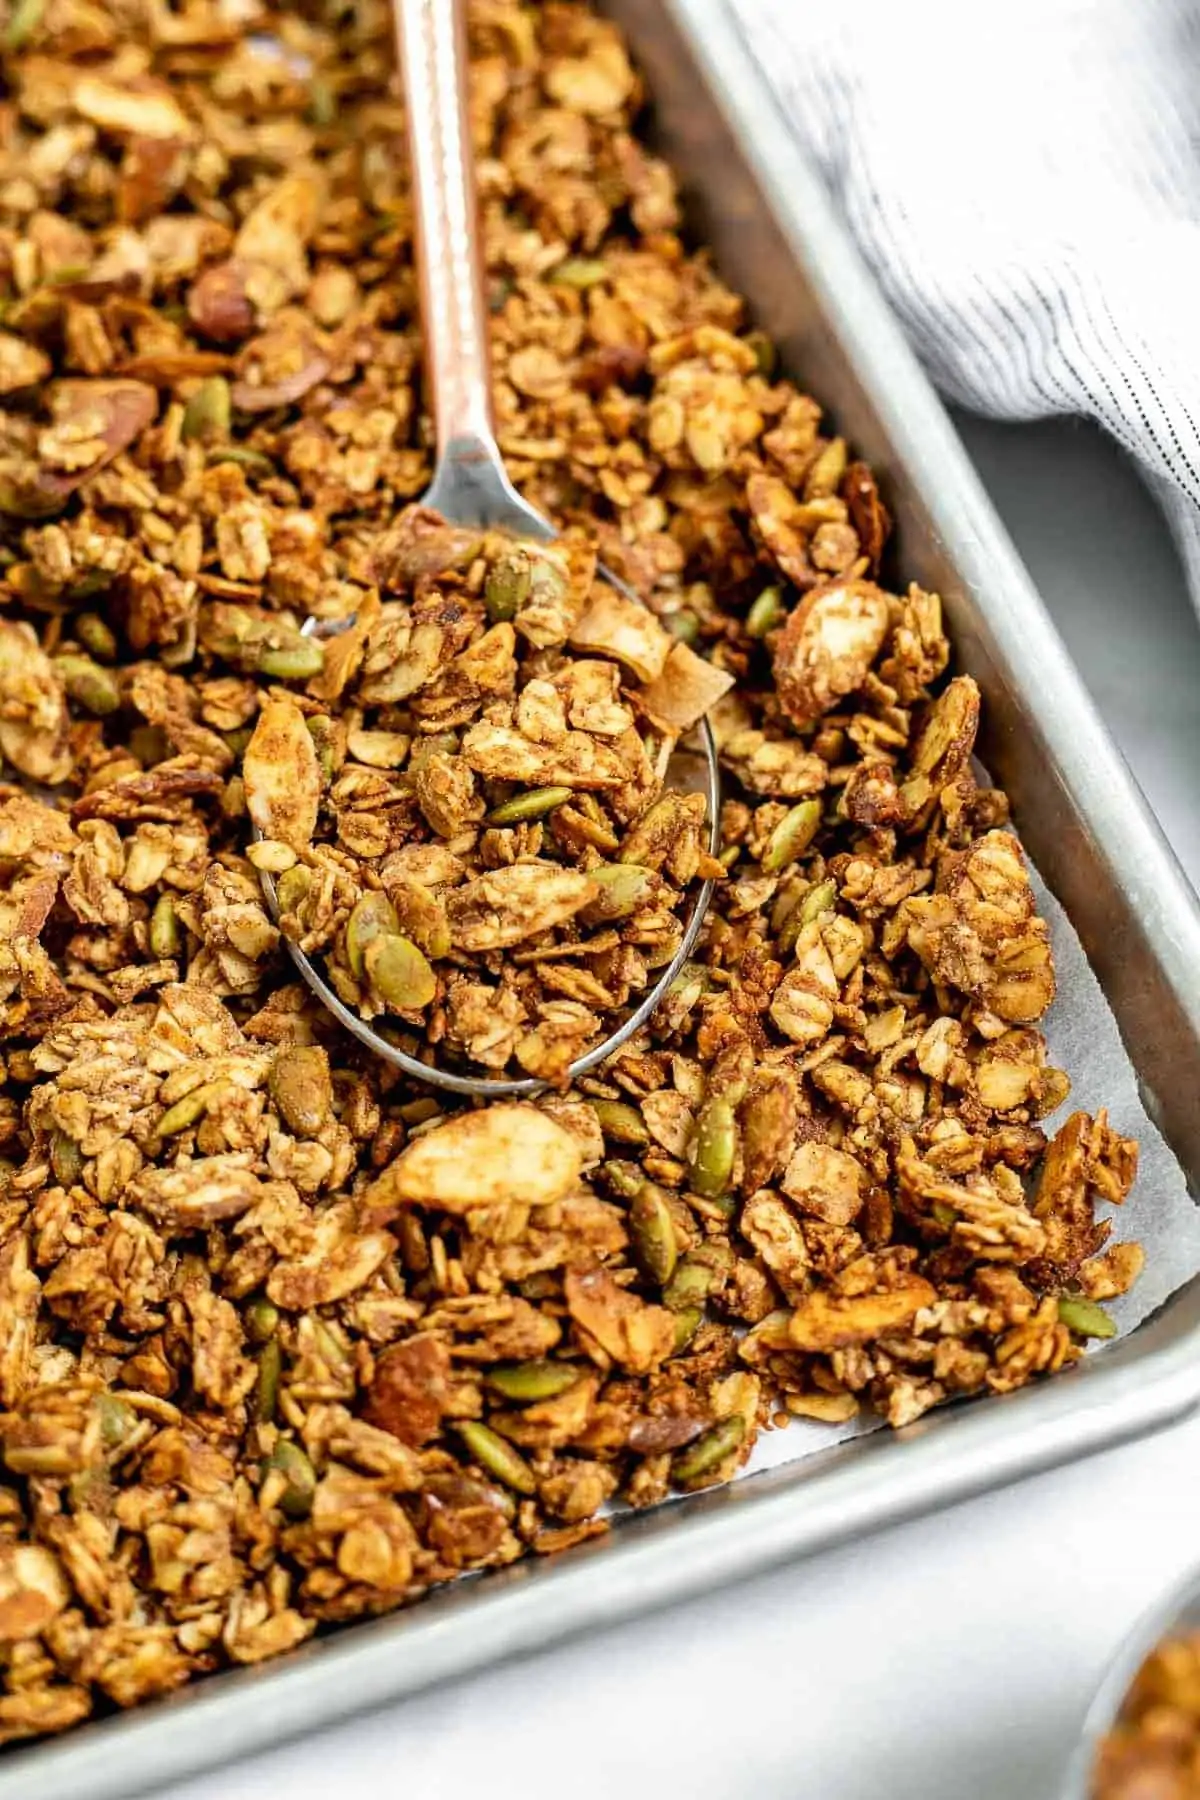 Up close image of the final gluten free granola on a baking tray with a spoon.